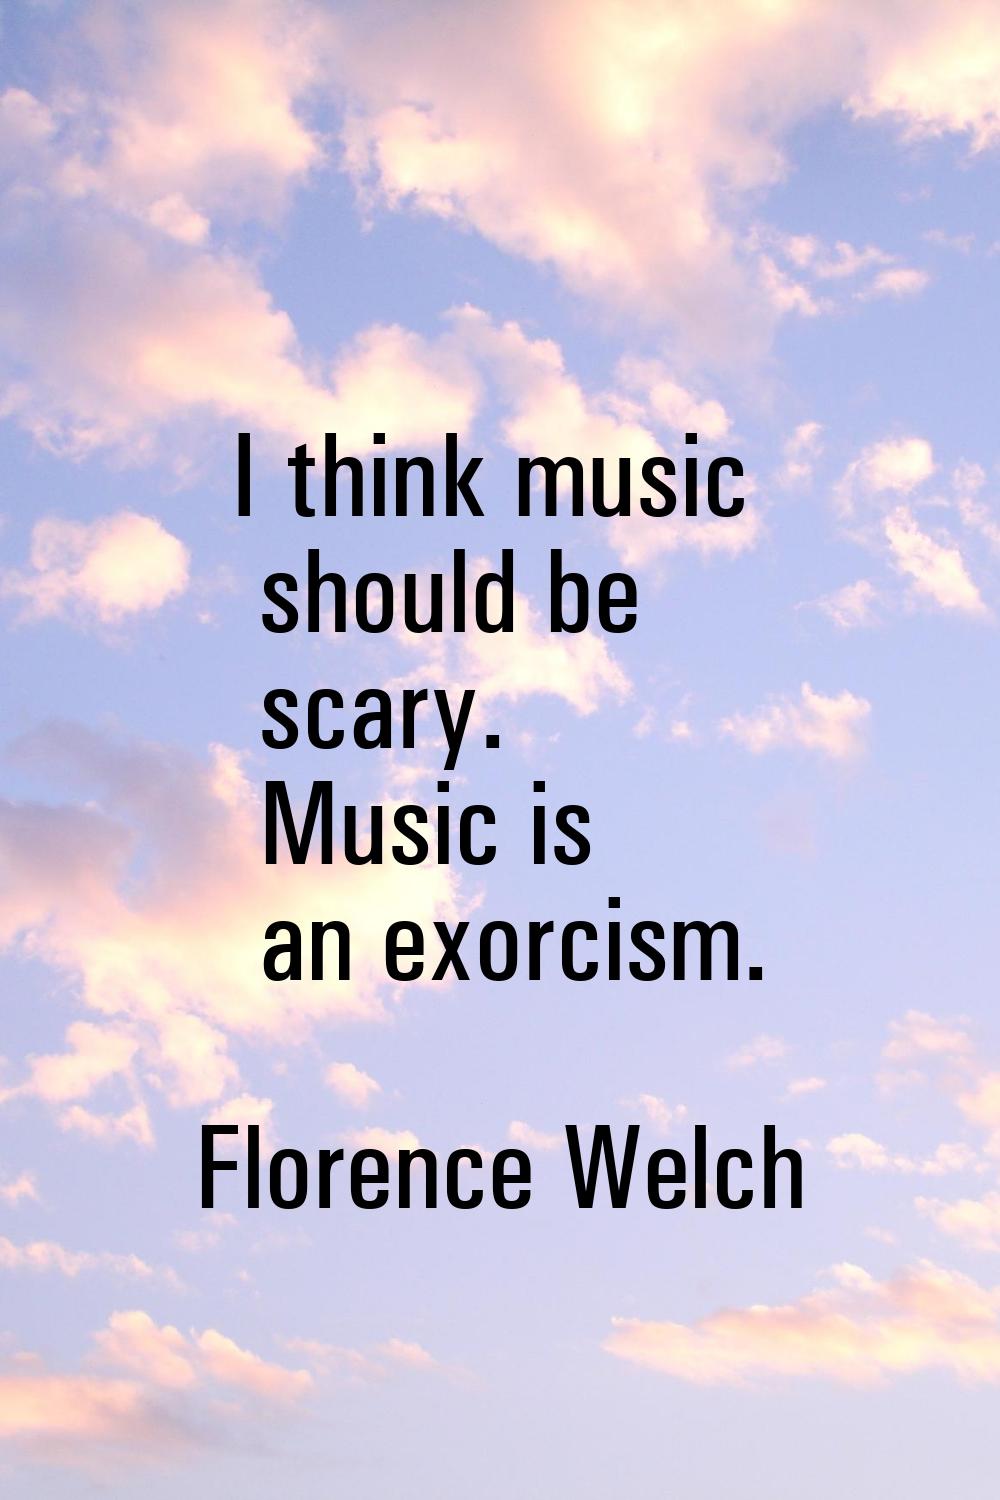 I think music should be scary. Music is an exorcism.